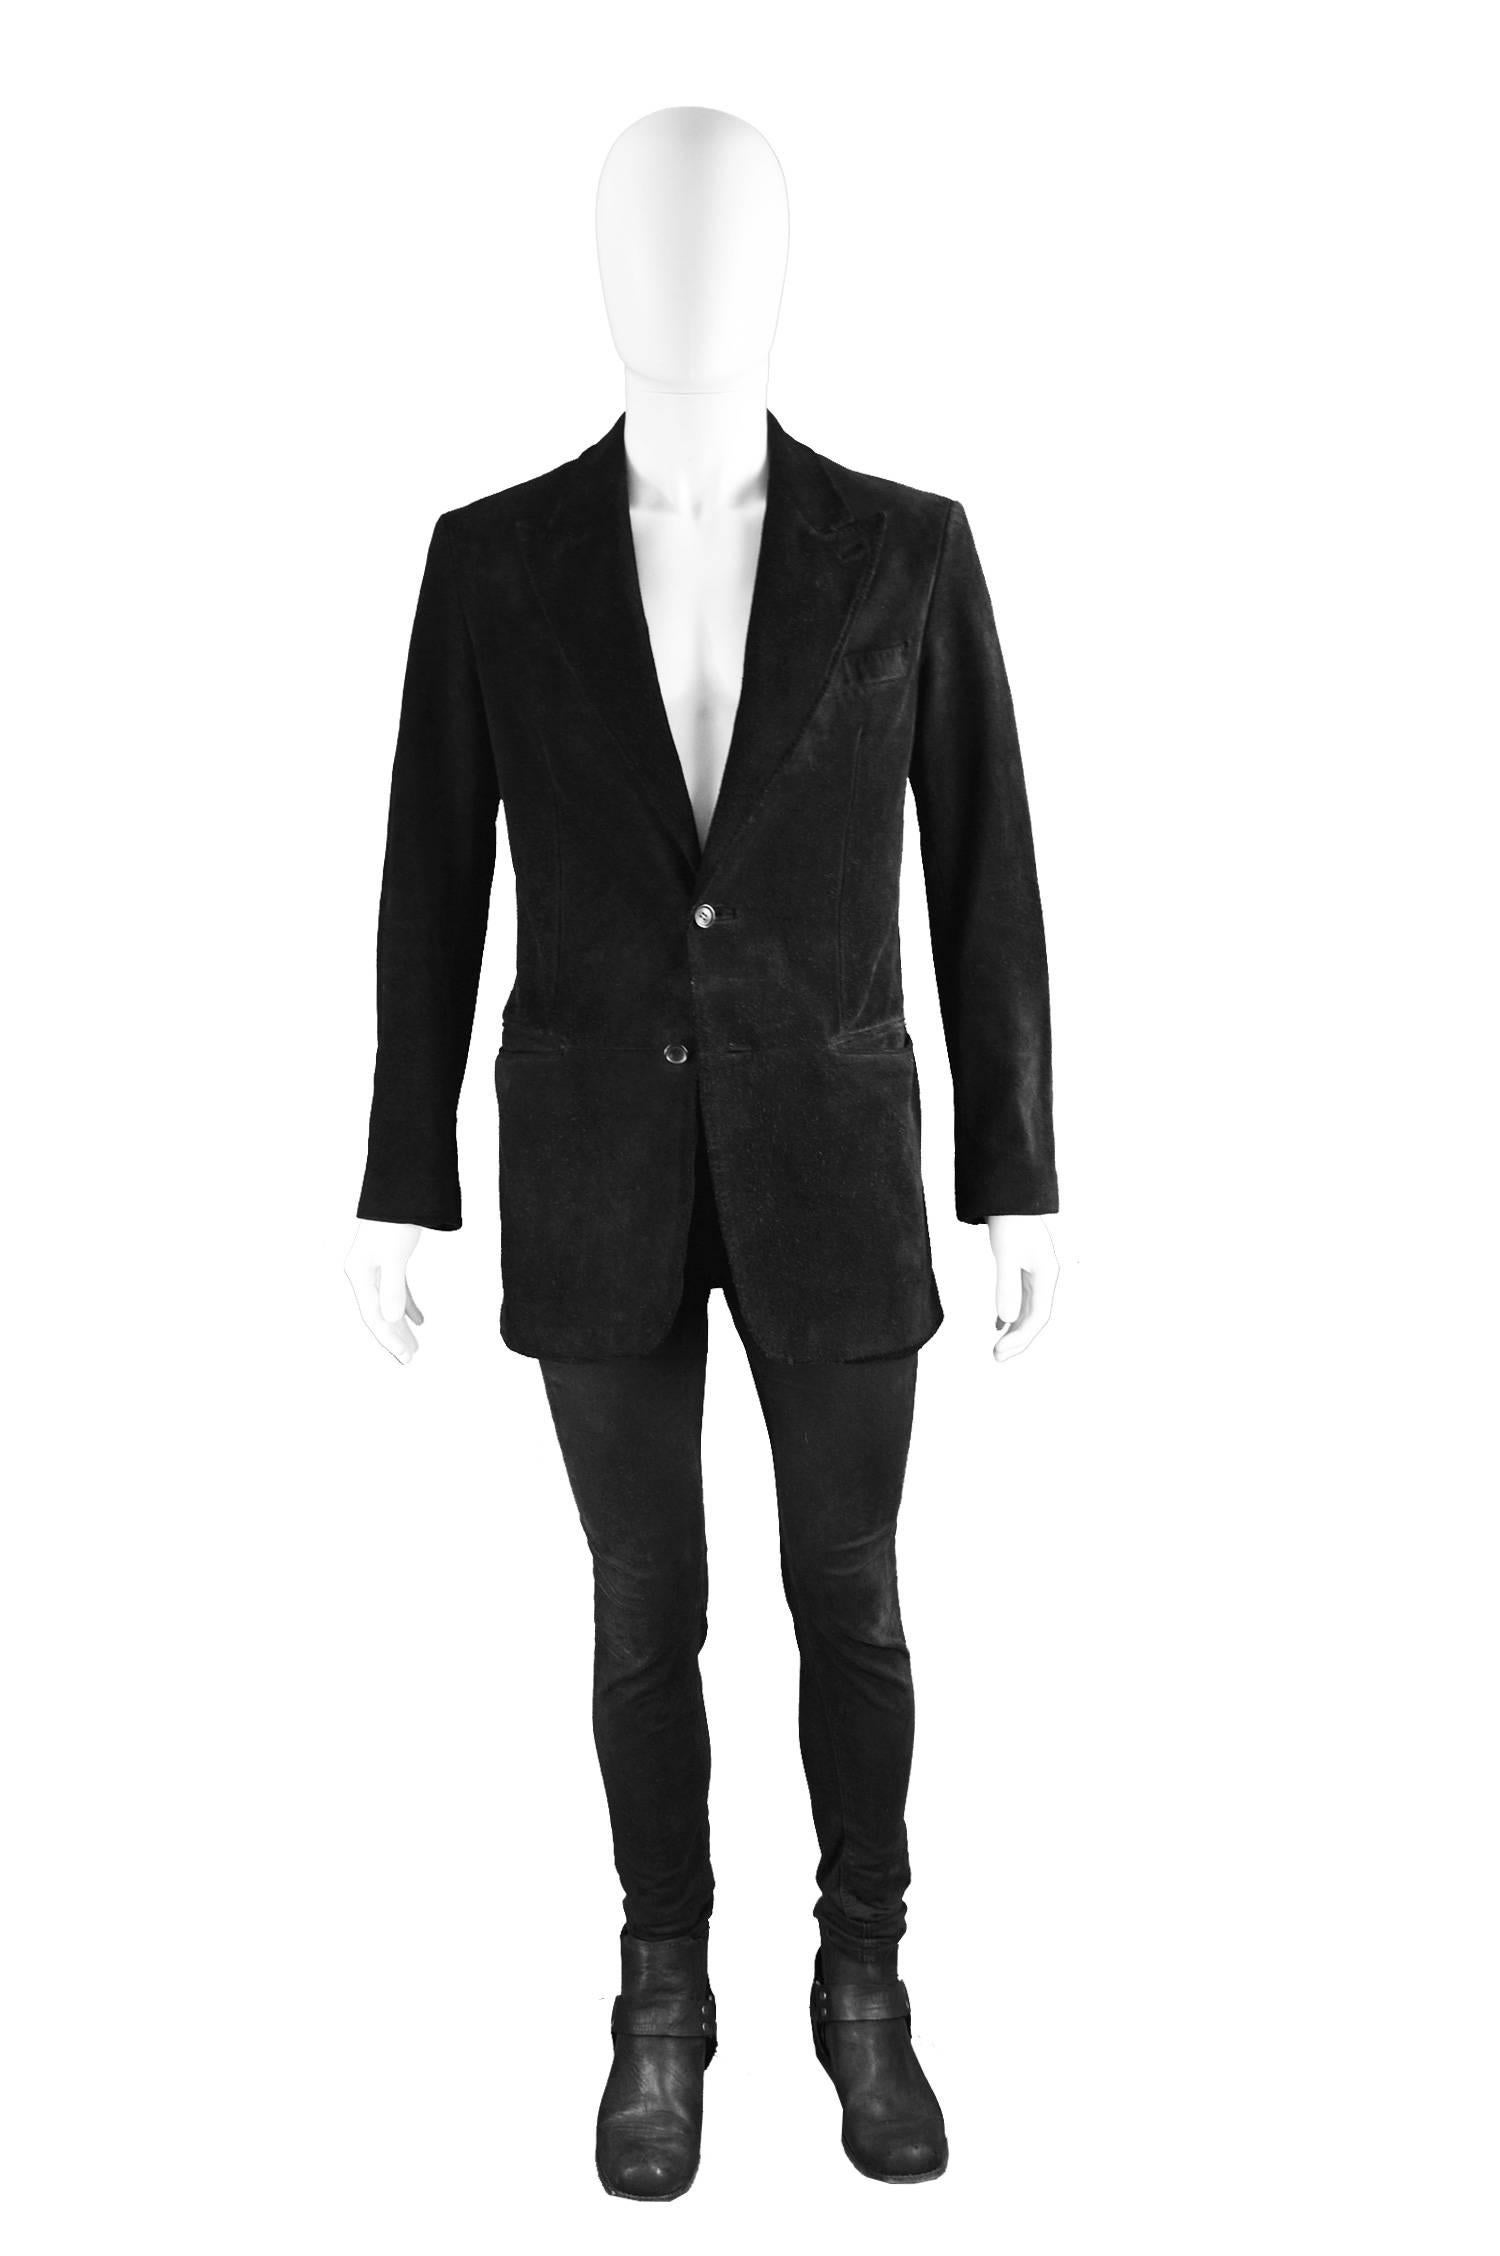 Tom Ford for Gucci Men's Black Suede Blazer with Peaked Lapels, A/W 2002

Size: Marked 48 which is roughly a men's Small
Chest - 42” / 106cm (please remember to leave roughly 4 inch room for movement and thickness of suede)
Waist - 36” / 91cm
Length